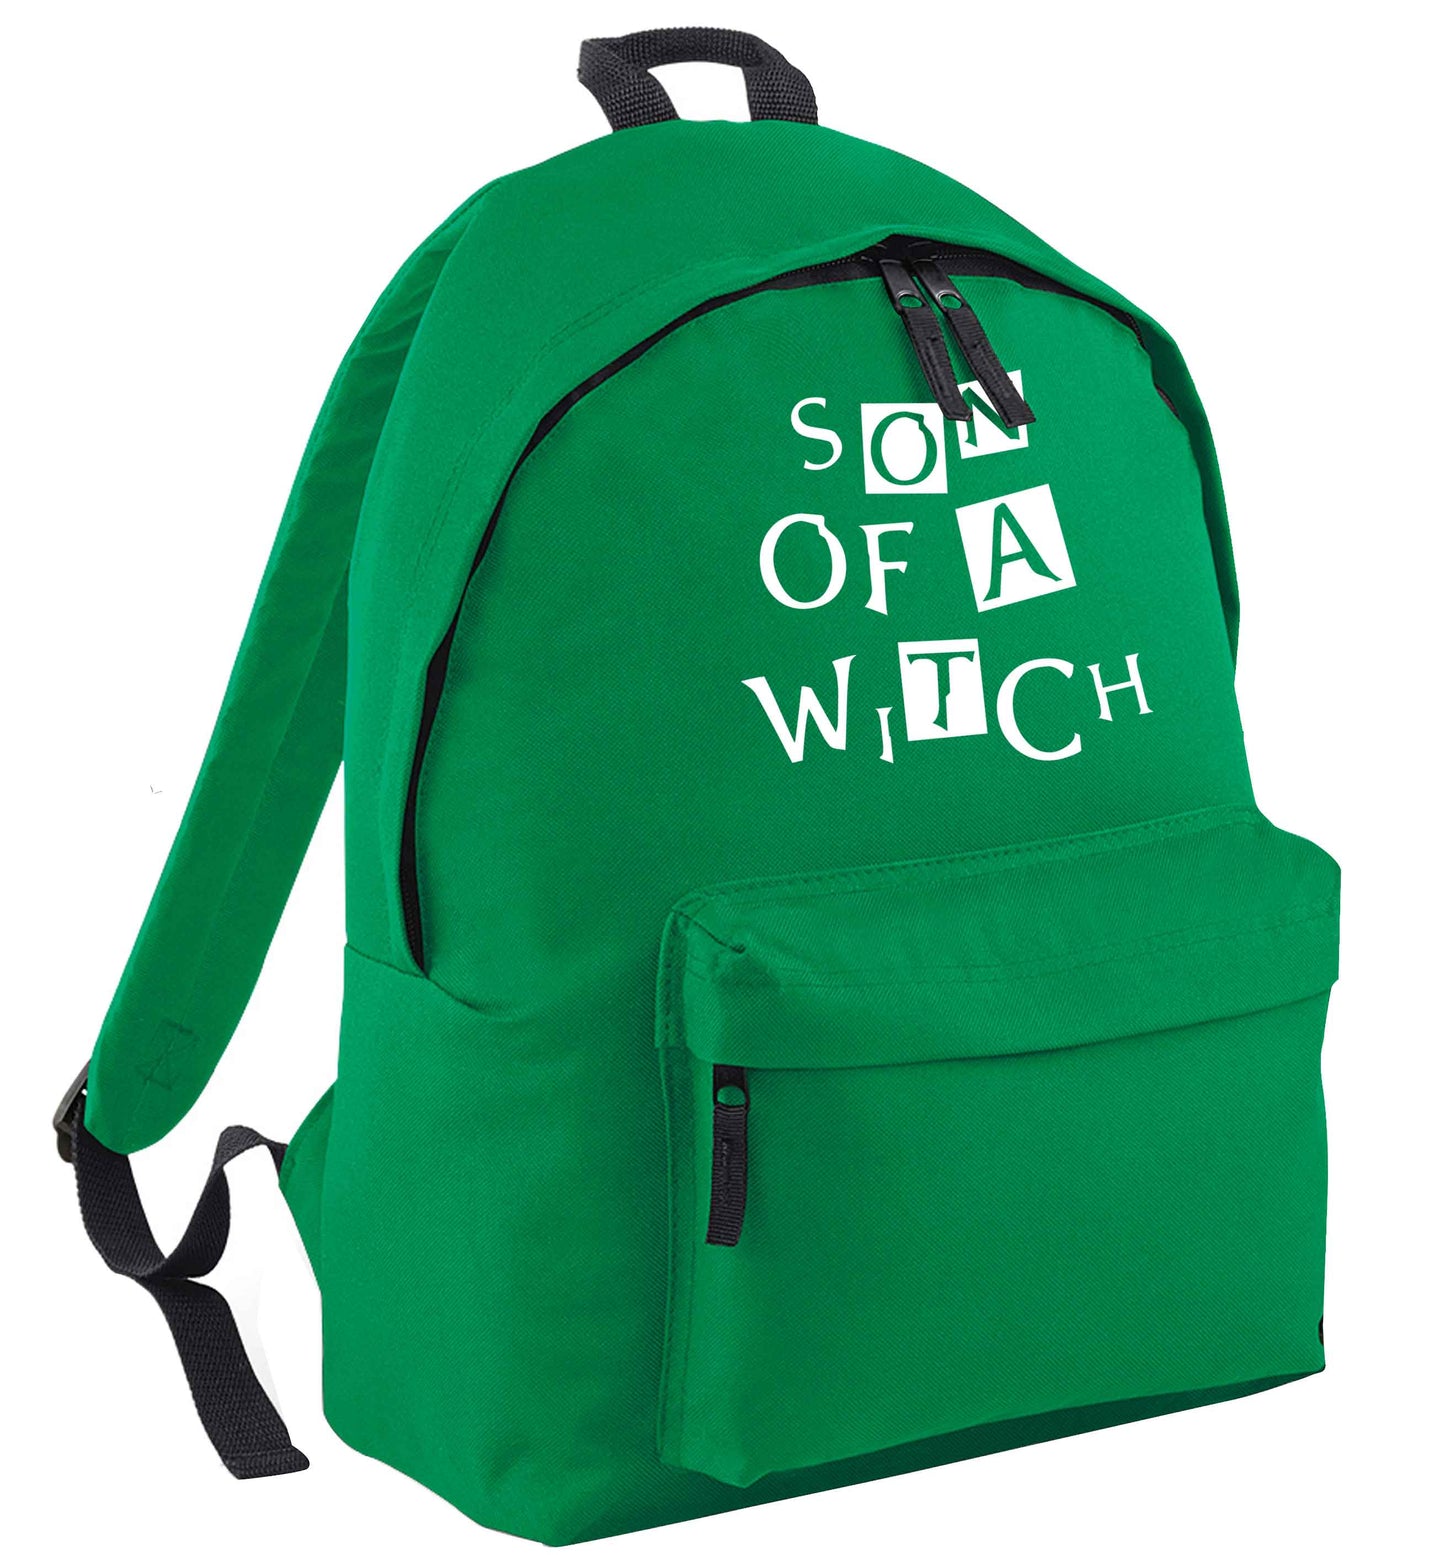 Son of a witch green adults backpack